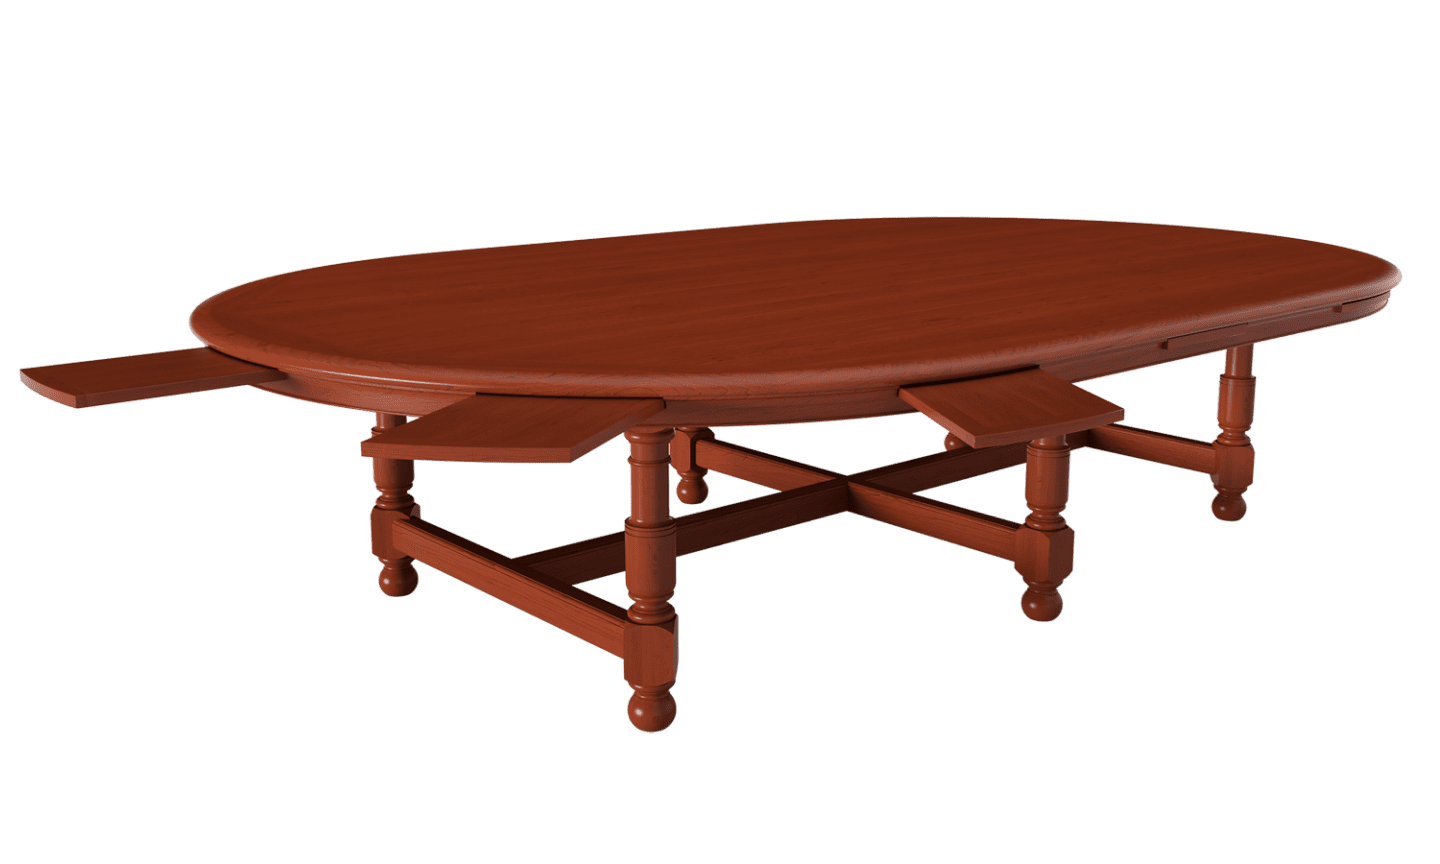 Harkness Table